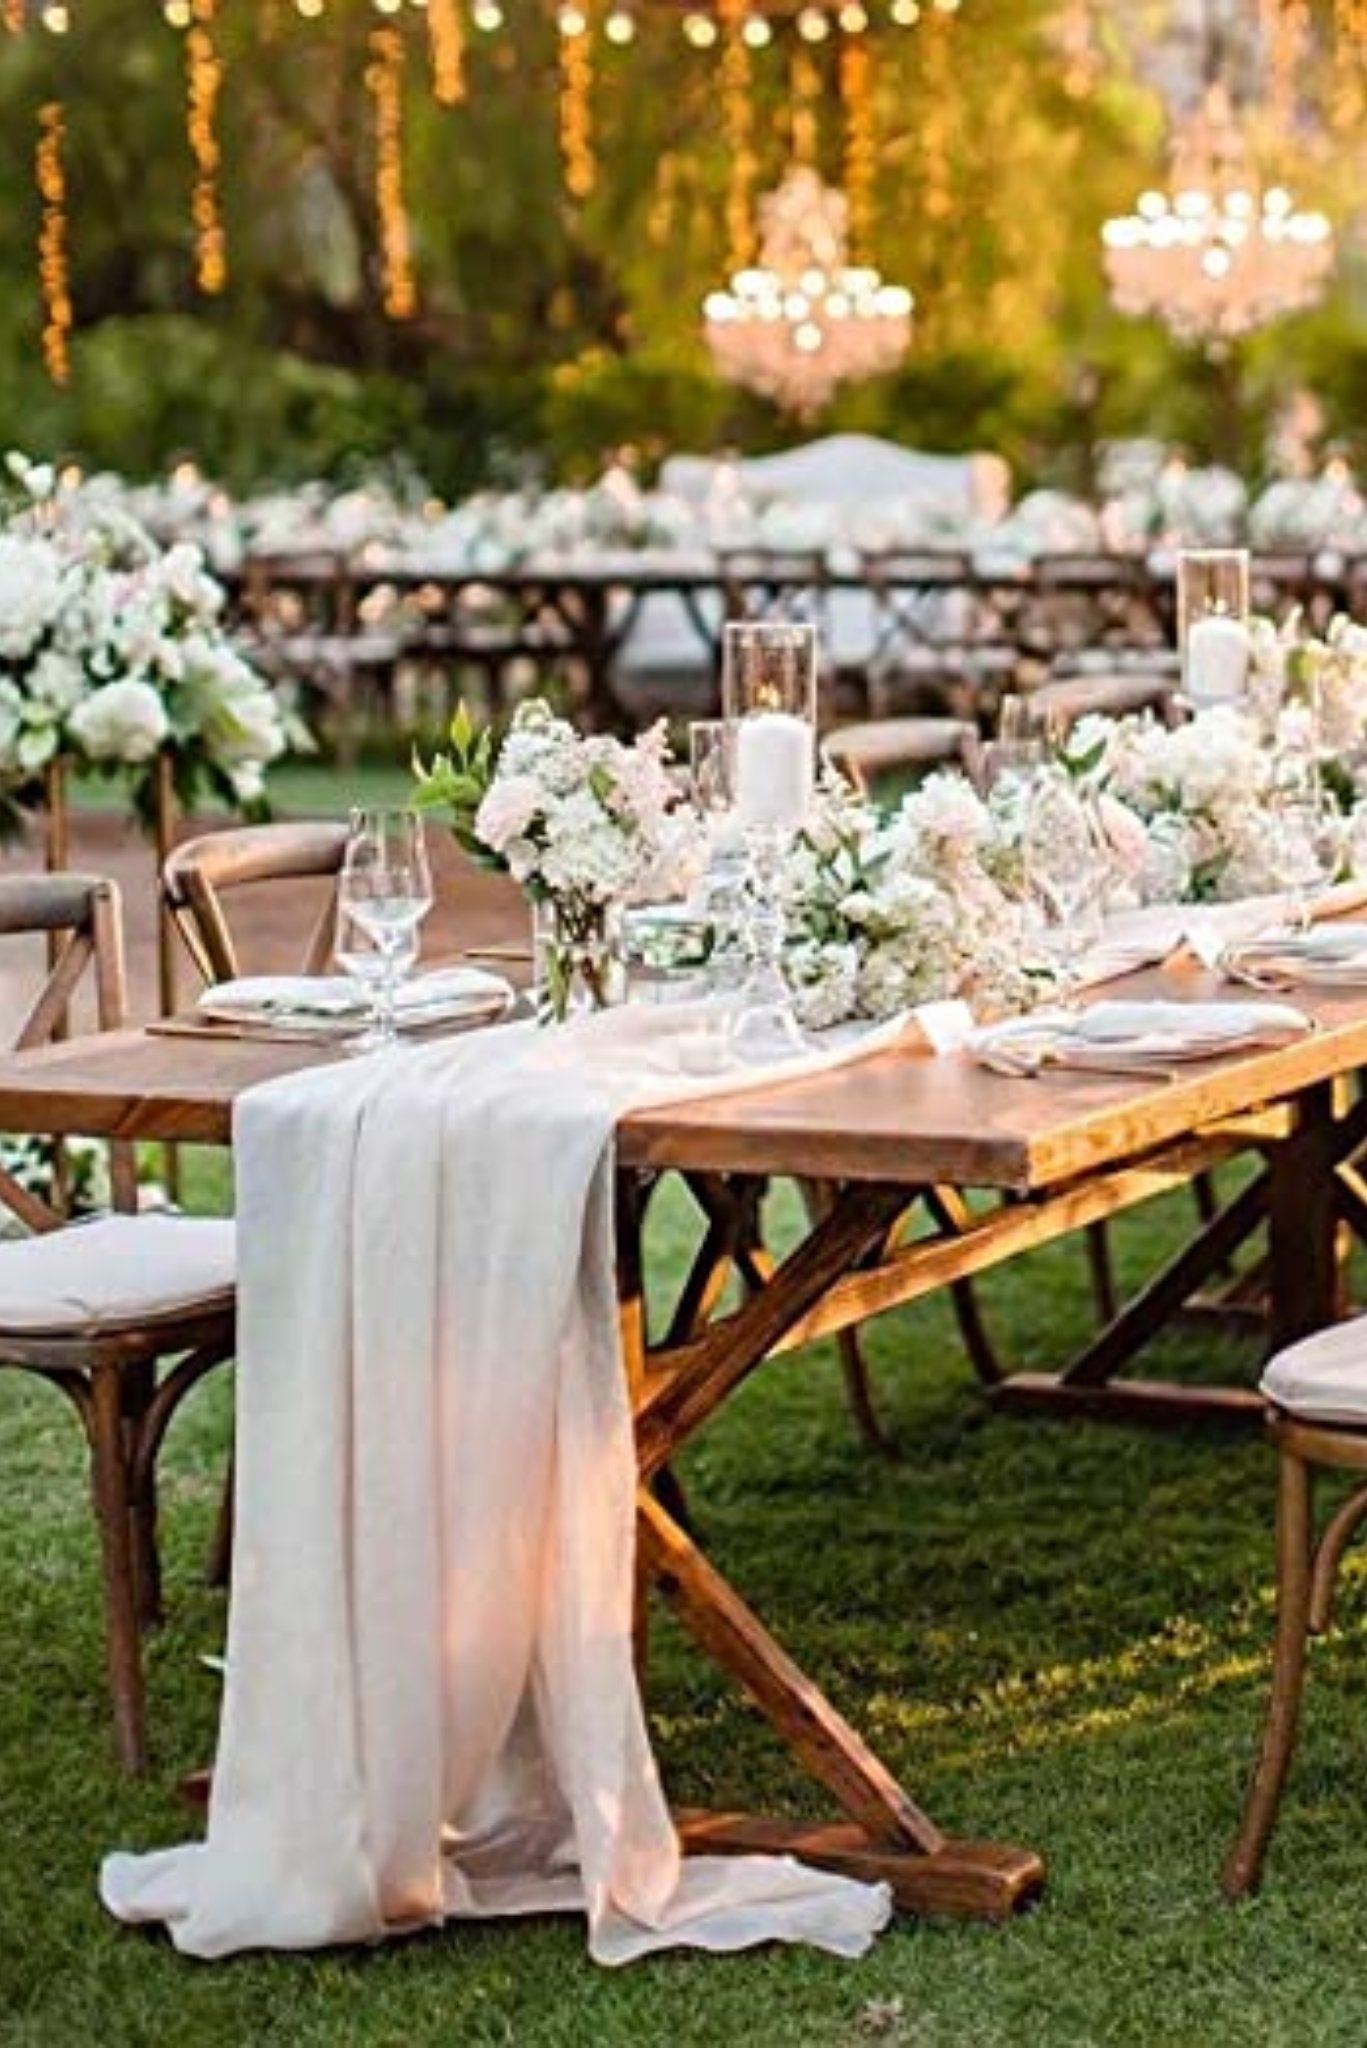 Top 3 Backyard Wedding Decorations 2022 Part 1 - Pretty Collected